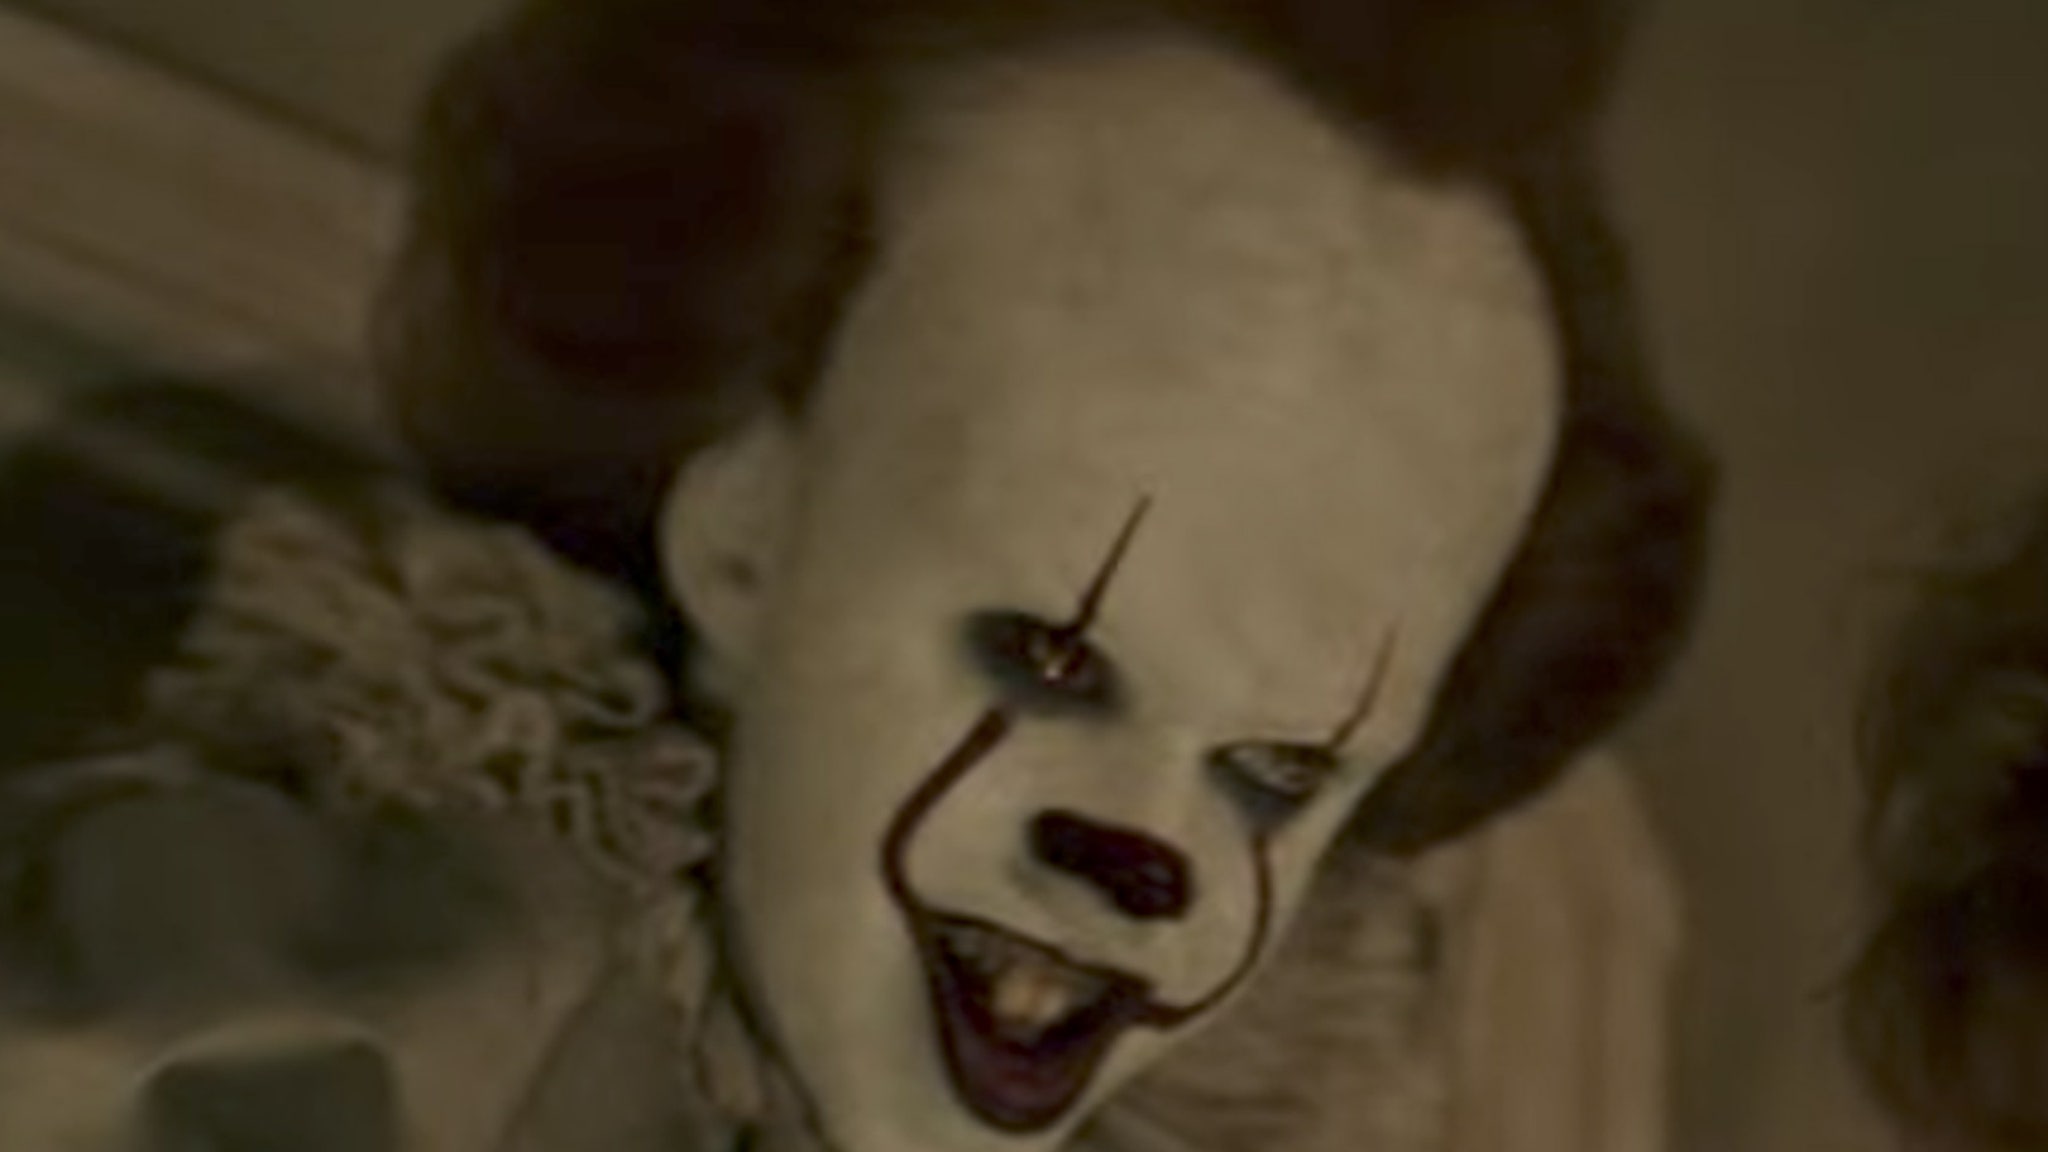 New Pennywise Clown